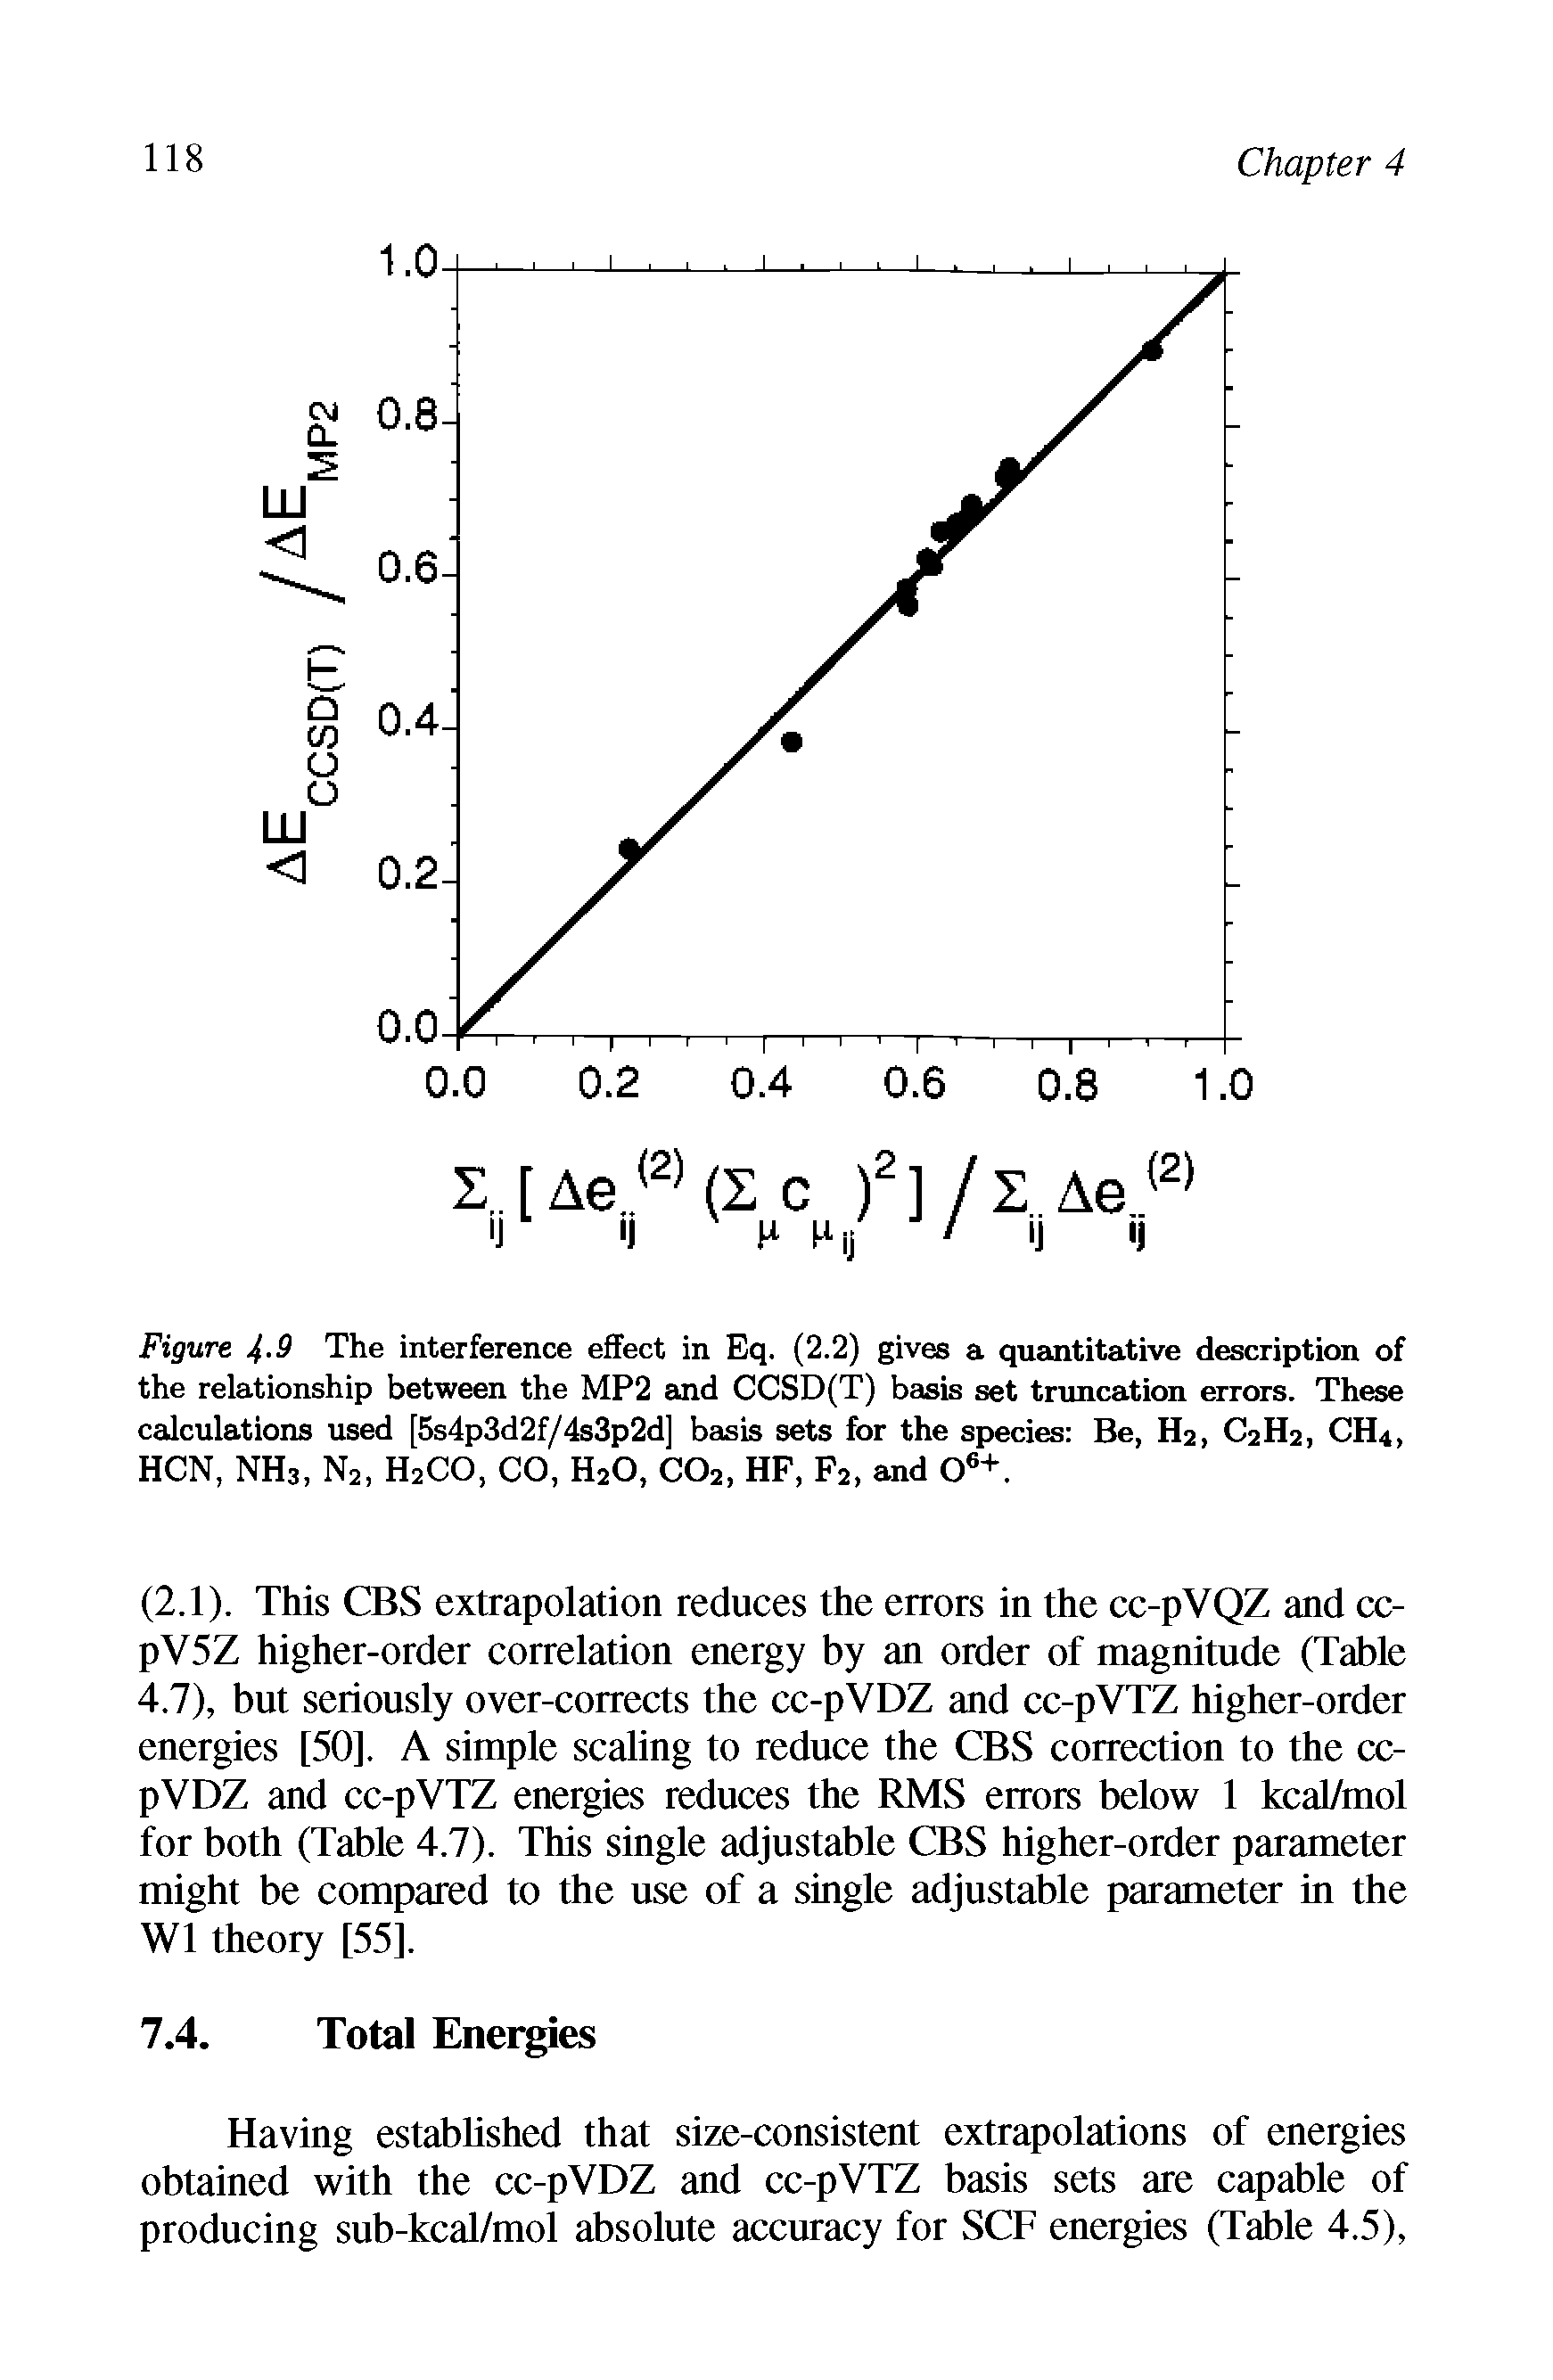 Figure 4-9 The interference effect in Eq. (2.2) gives a quantitative description of the relationship between the MP2 and CCSD(T) basis set truncation errors. These calculations used [5s4p3d2f/4s3p2d] basis sets for the species Be, H2, C2H2, CH4, HCN, NH3, N2i H2CO, CO, H20, C02, HF, F2, and Oe+.